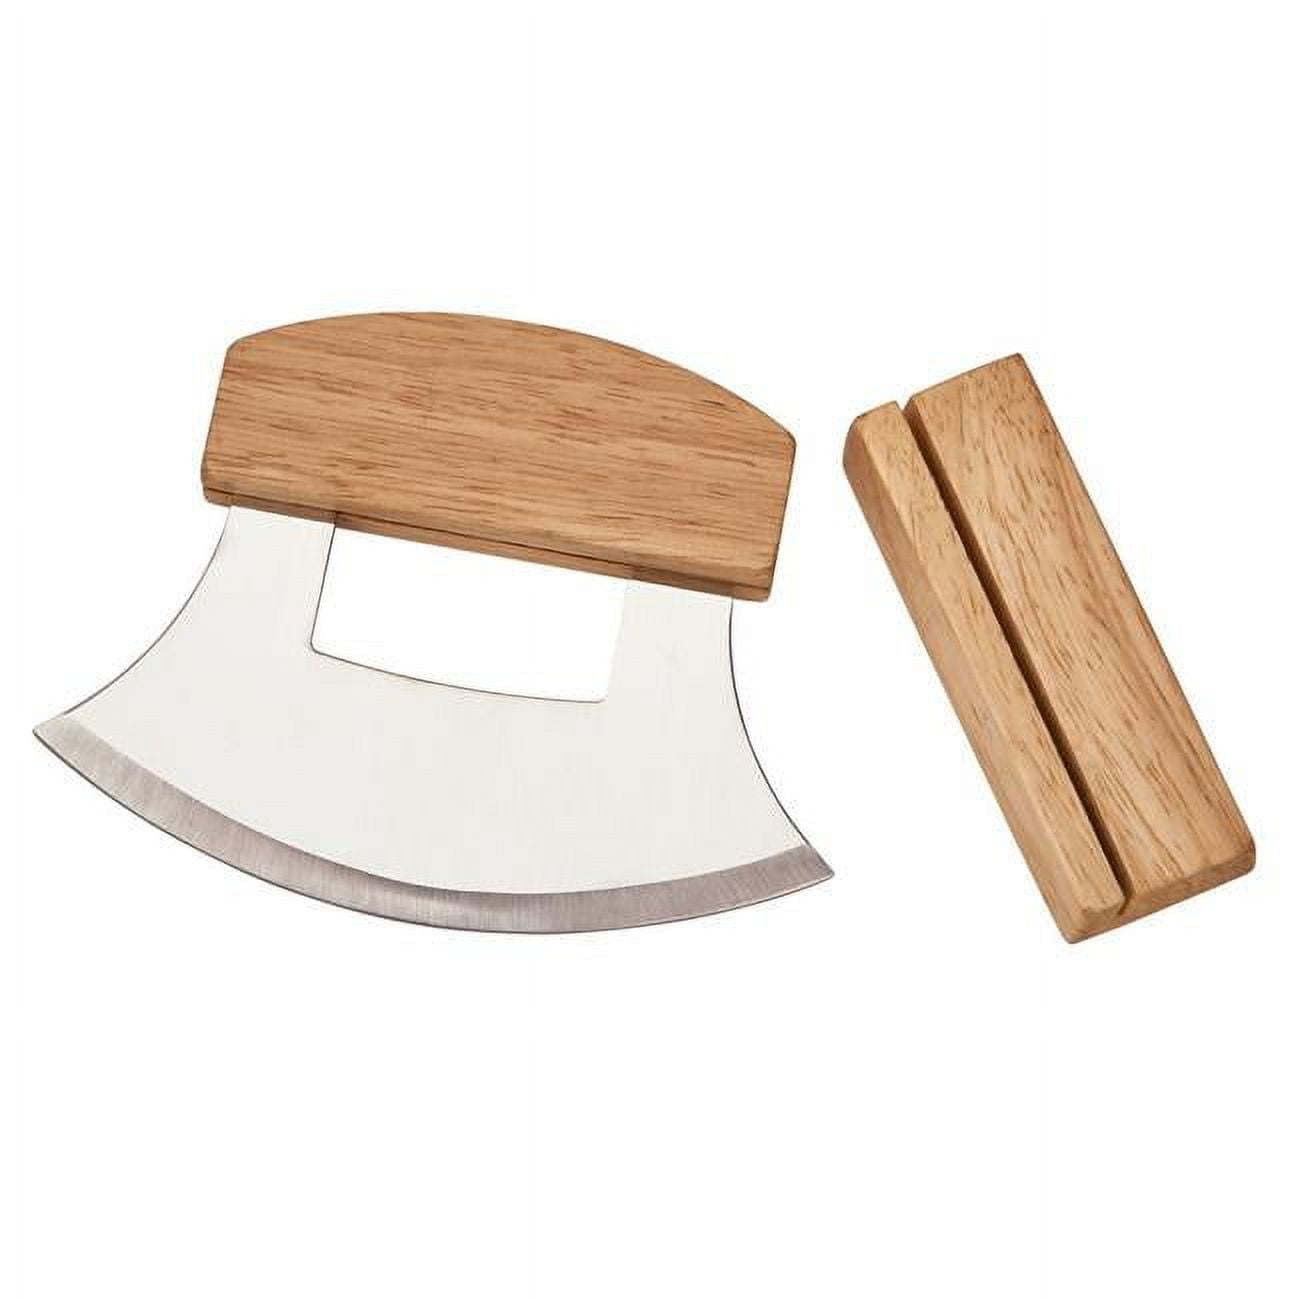 RazorEdge Stainless Steel ULU Knife with Wooden Stand